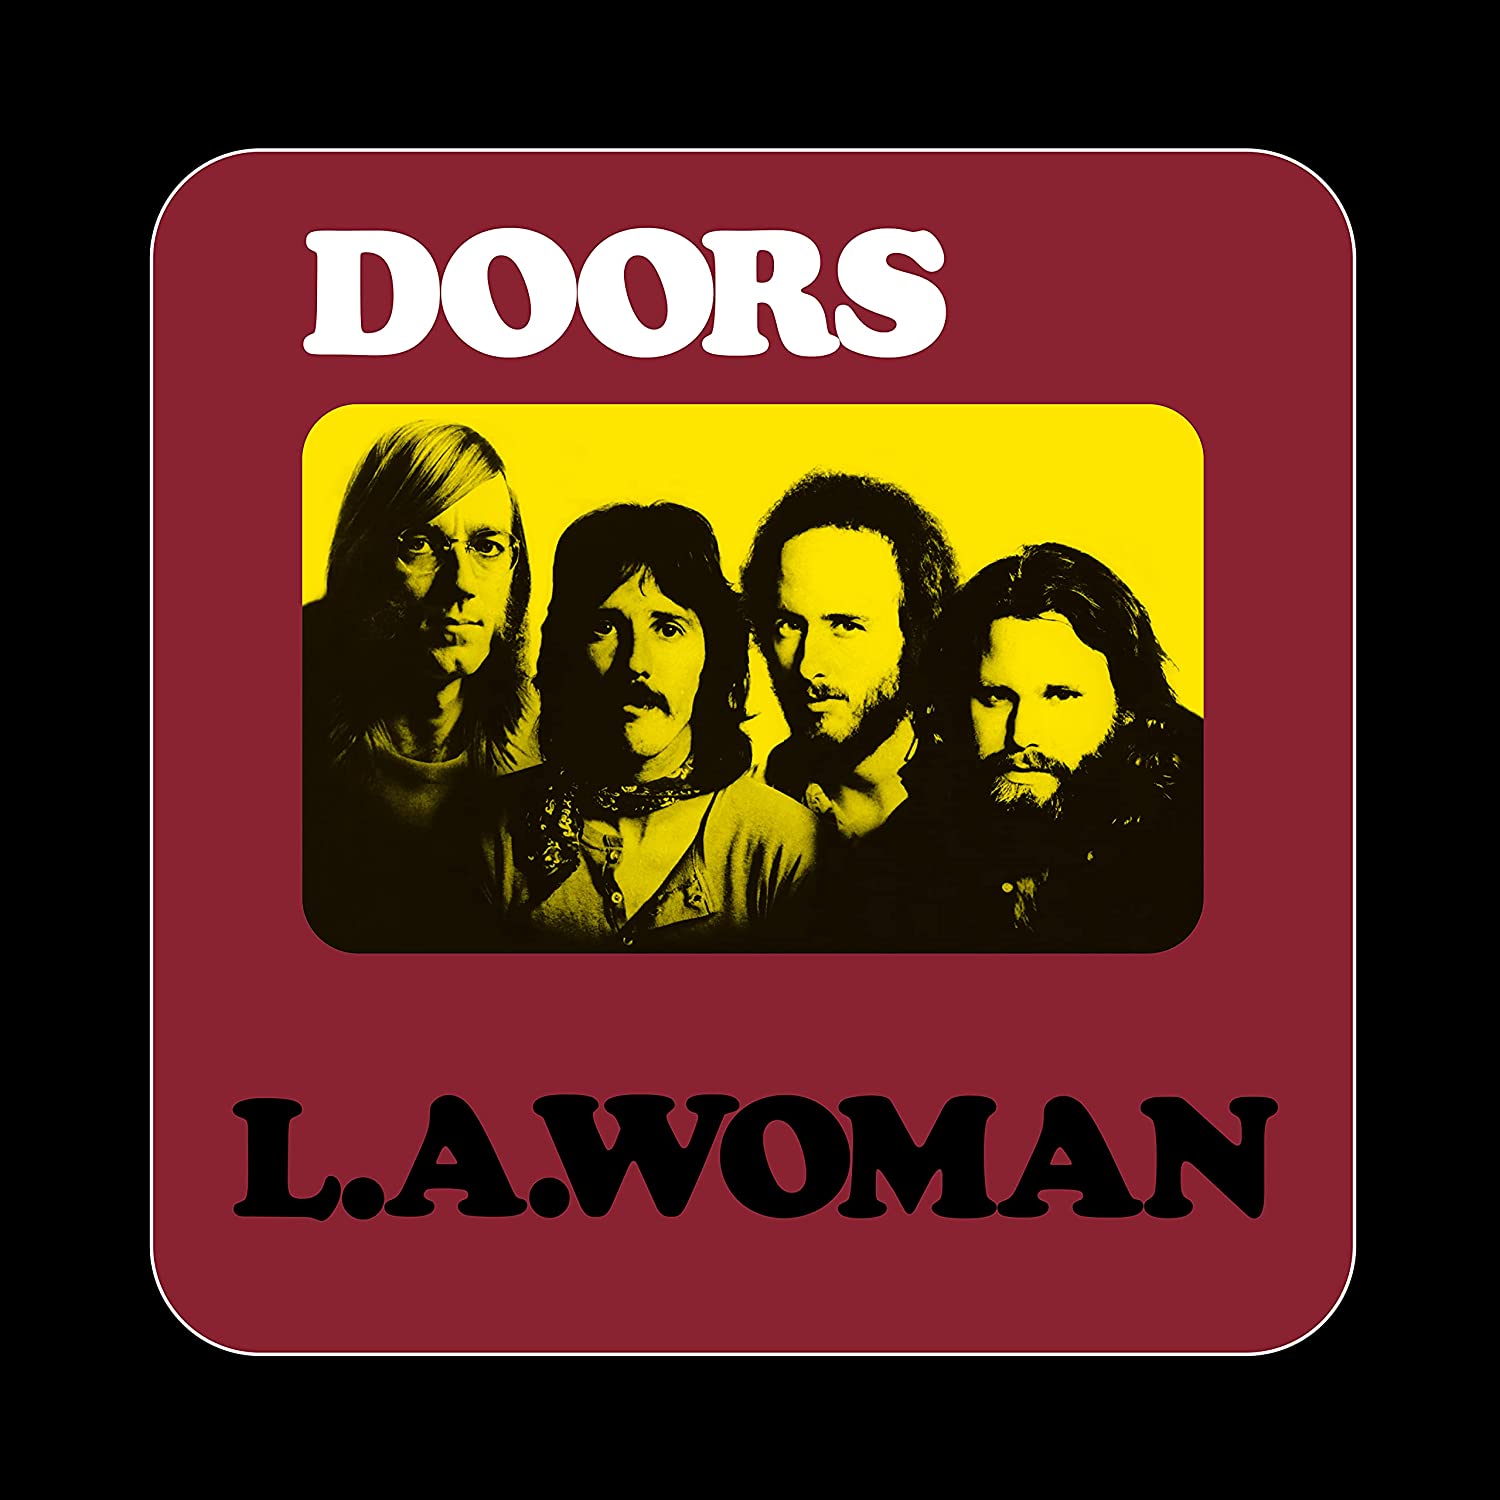 Doors L.a. Woman (50th Anniversary Deluxe Edition)